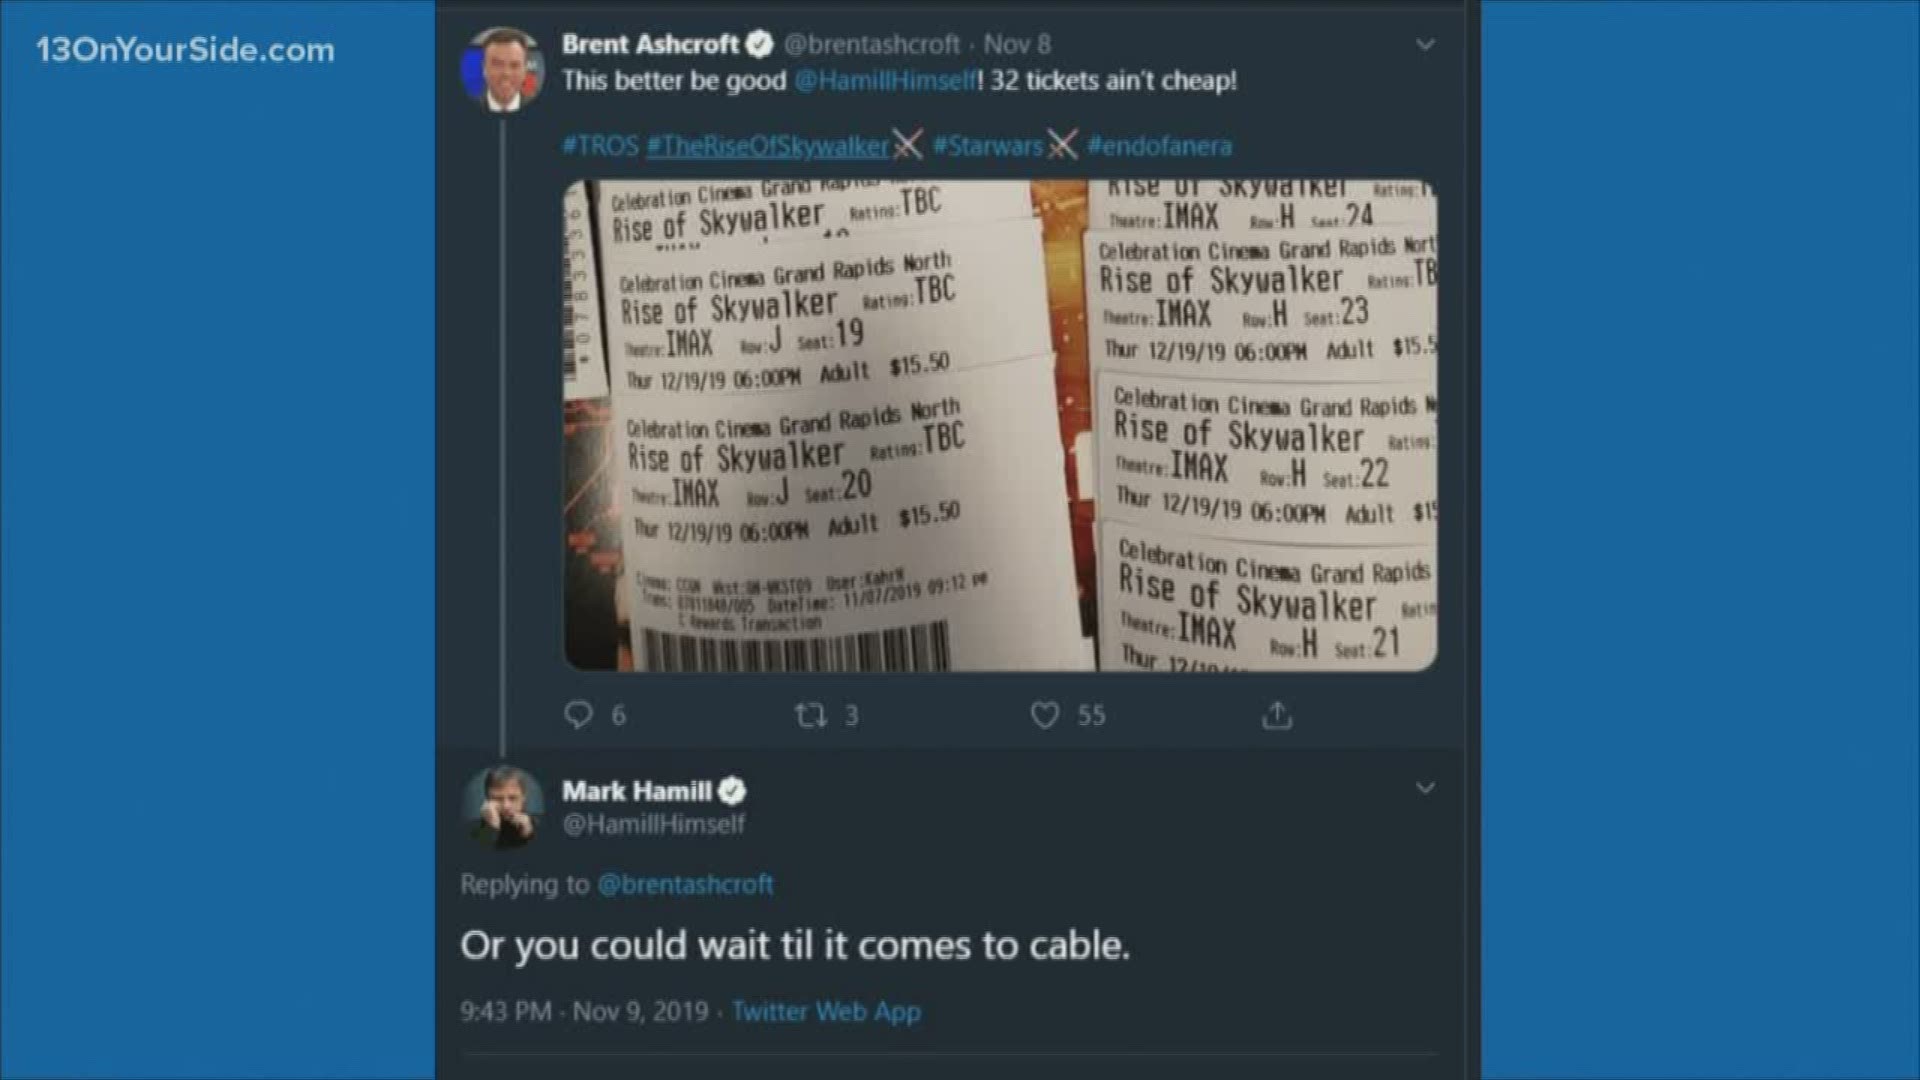 13 ON YOUR SIDE's Brent Ashcroft bought tickets for all his friends to see the newest installment of the Star Wars series and tweeted to Mark Hamill.